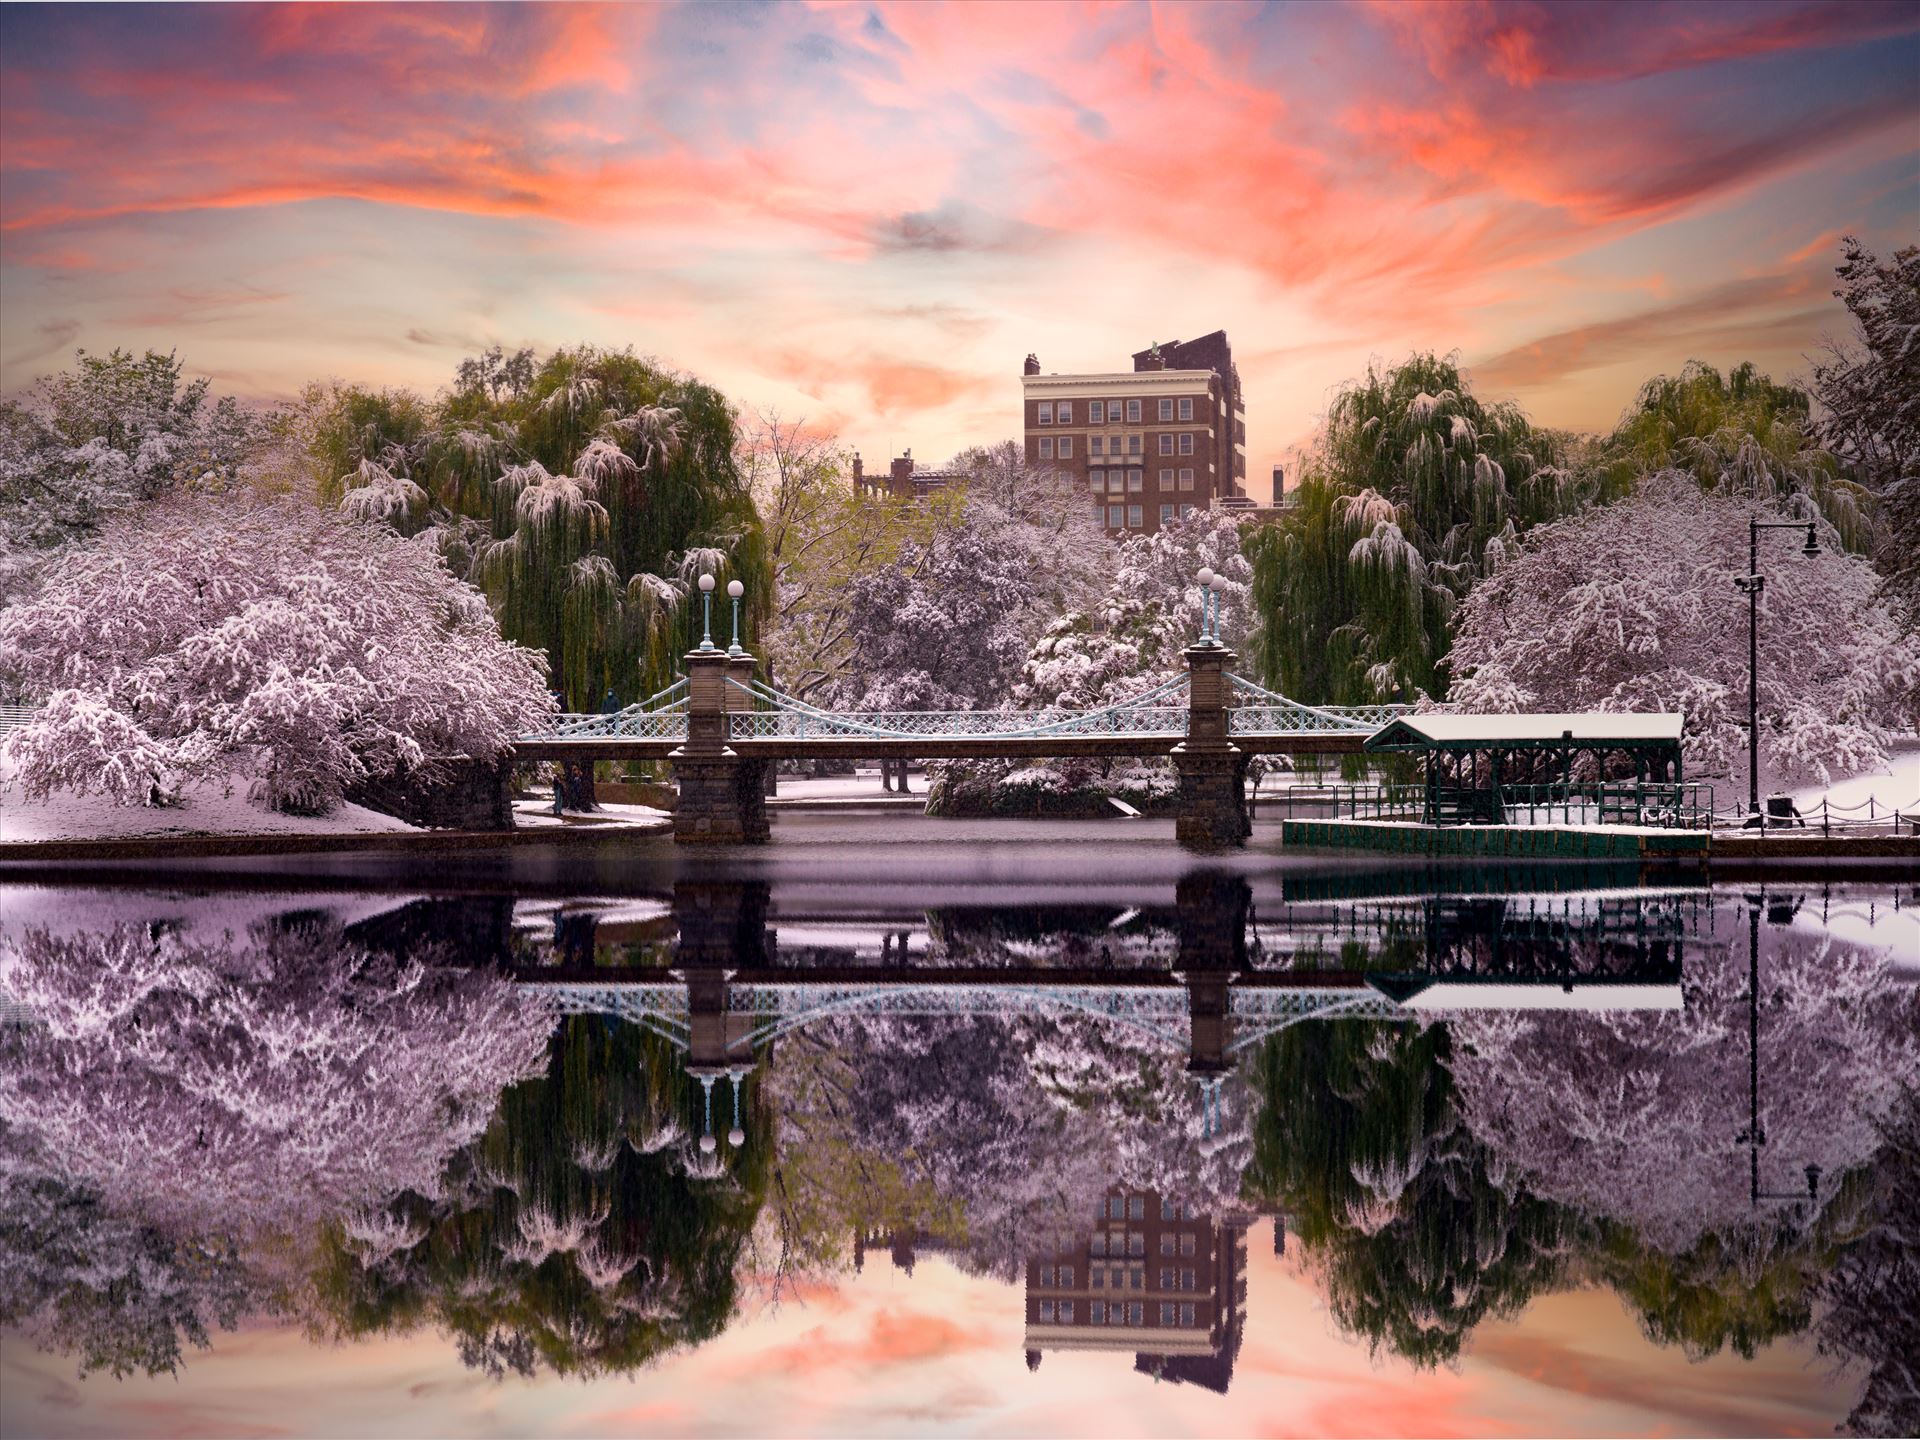 The stillness of an early winter snowfall in the famous and historic Boston Public Garden in Boston, Massachusetts -  by New England Photography